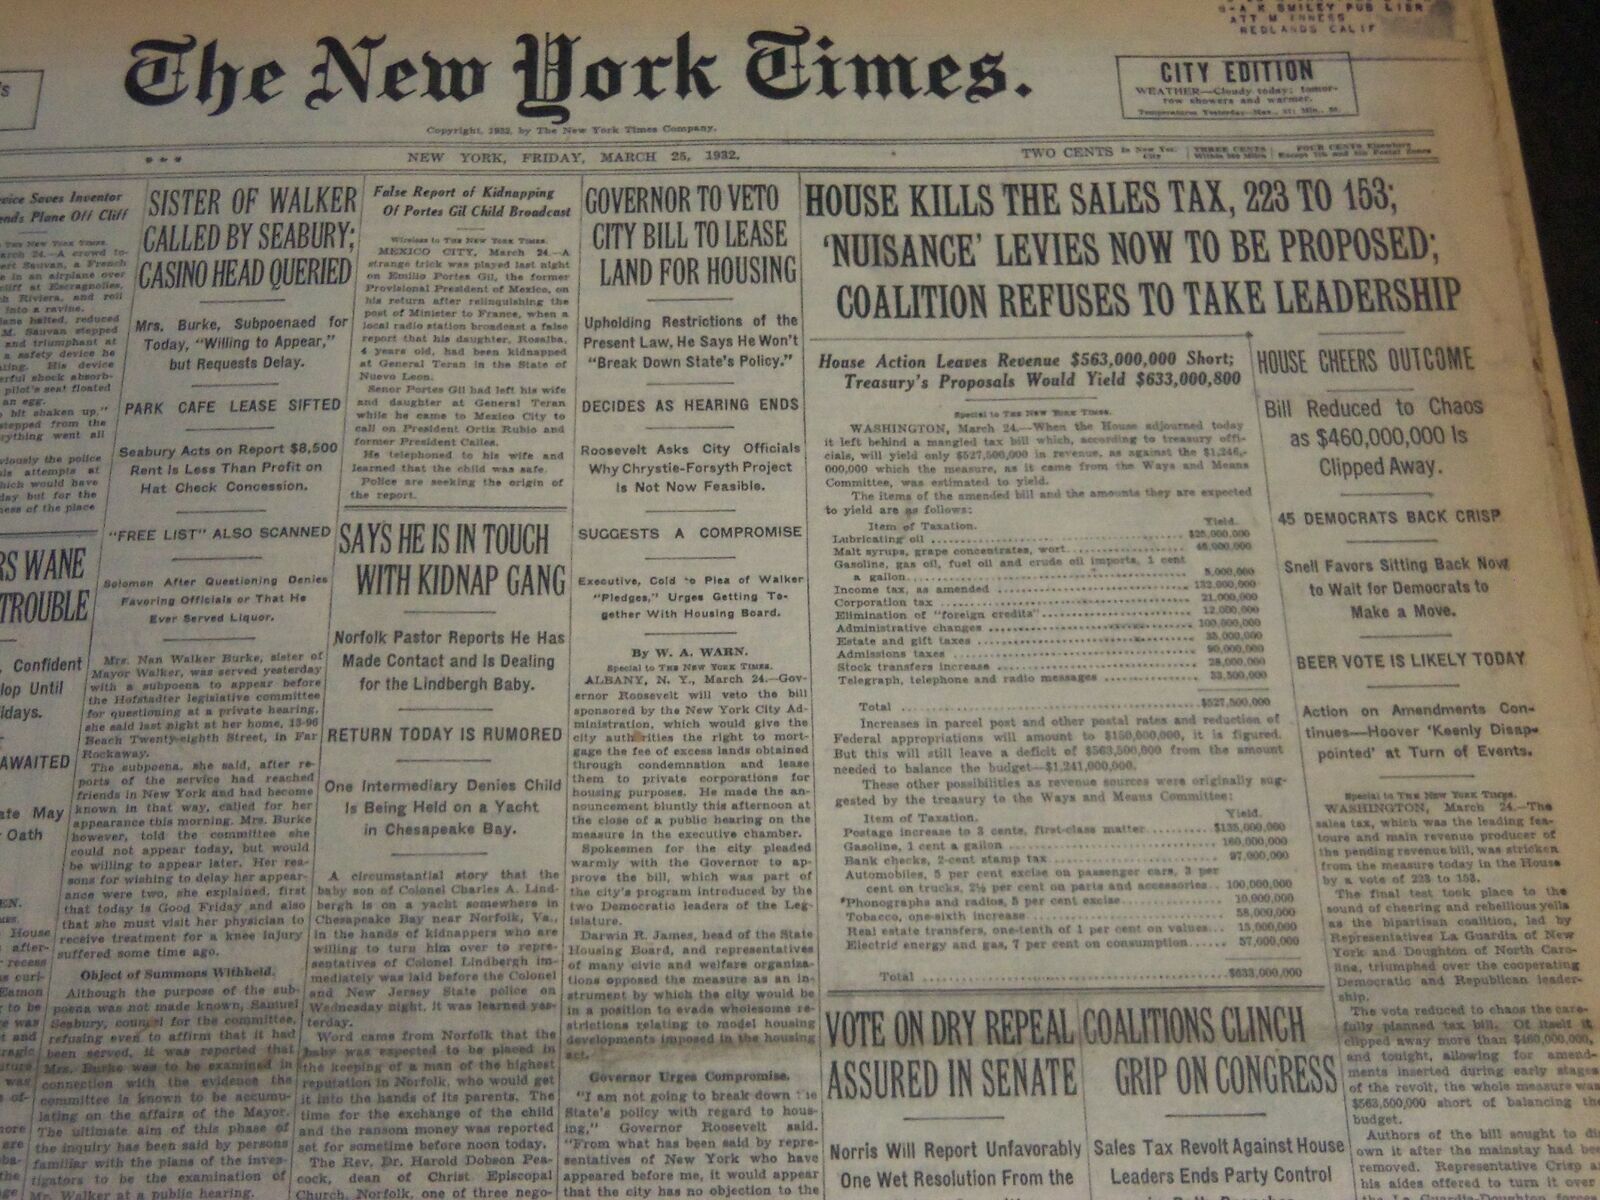 1932 MARCH 25 NEW YORK TIMES - TARZAN THE APE MAN OPENS TODAY - NT 6180